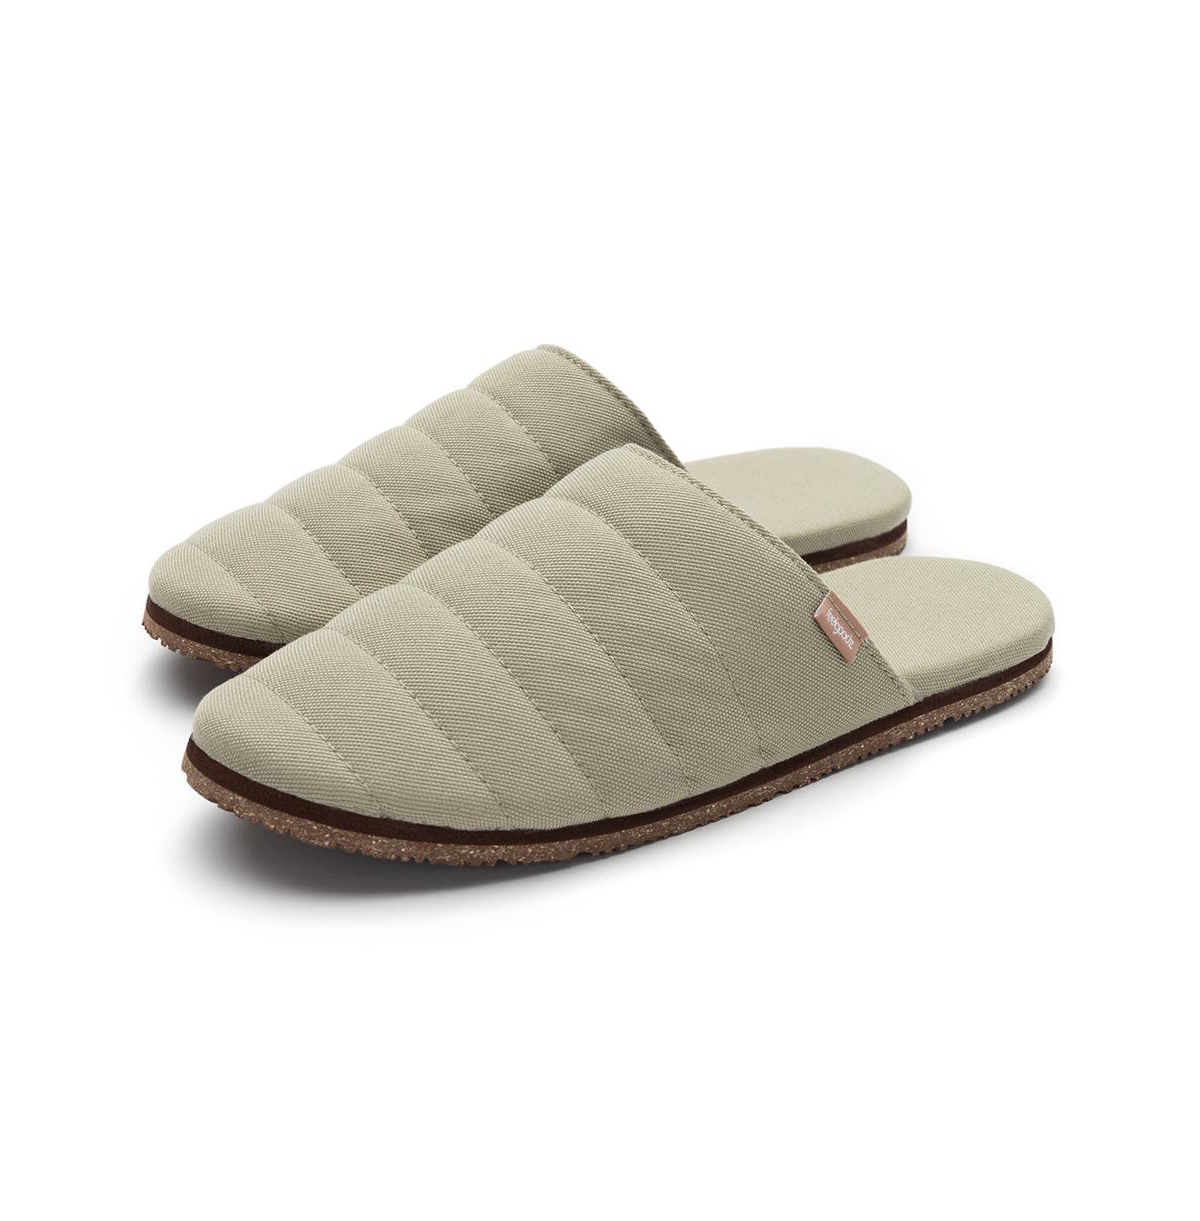 Women's Mule Slipper Artisan Quilted Indoor / Outdoor House Shoes - Light/Pastel Purple